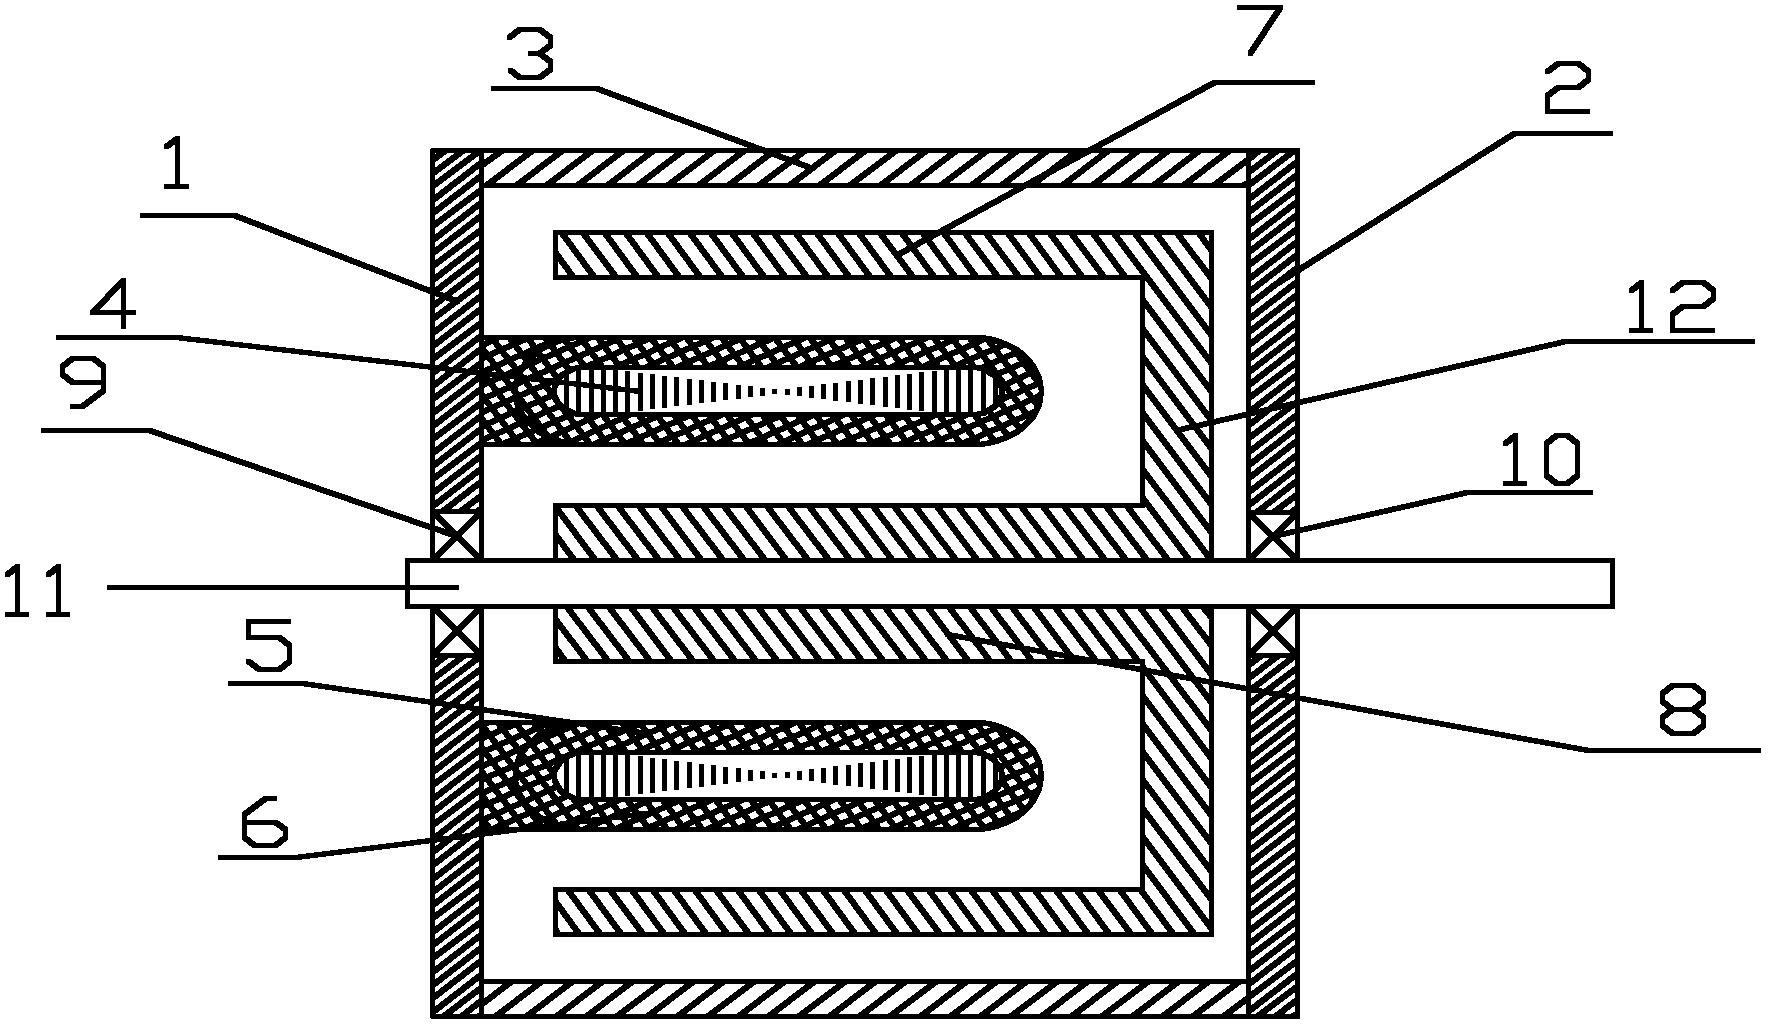 Switched reluctance motor with dual-rotor structure